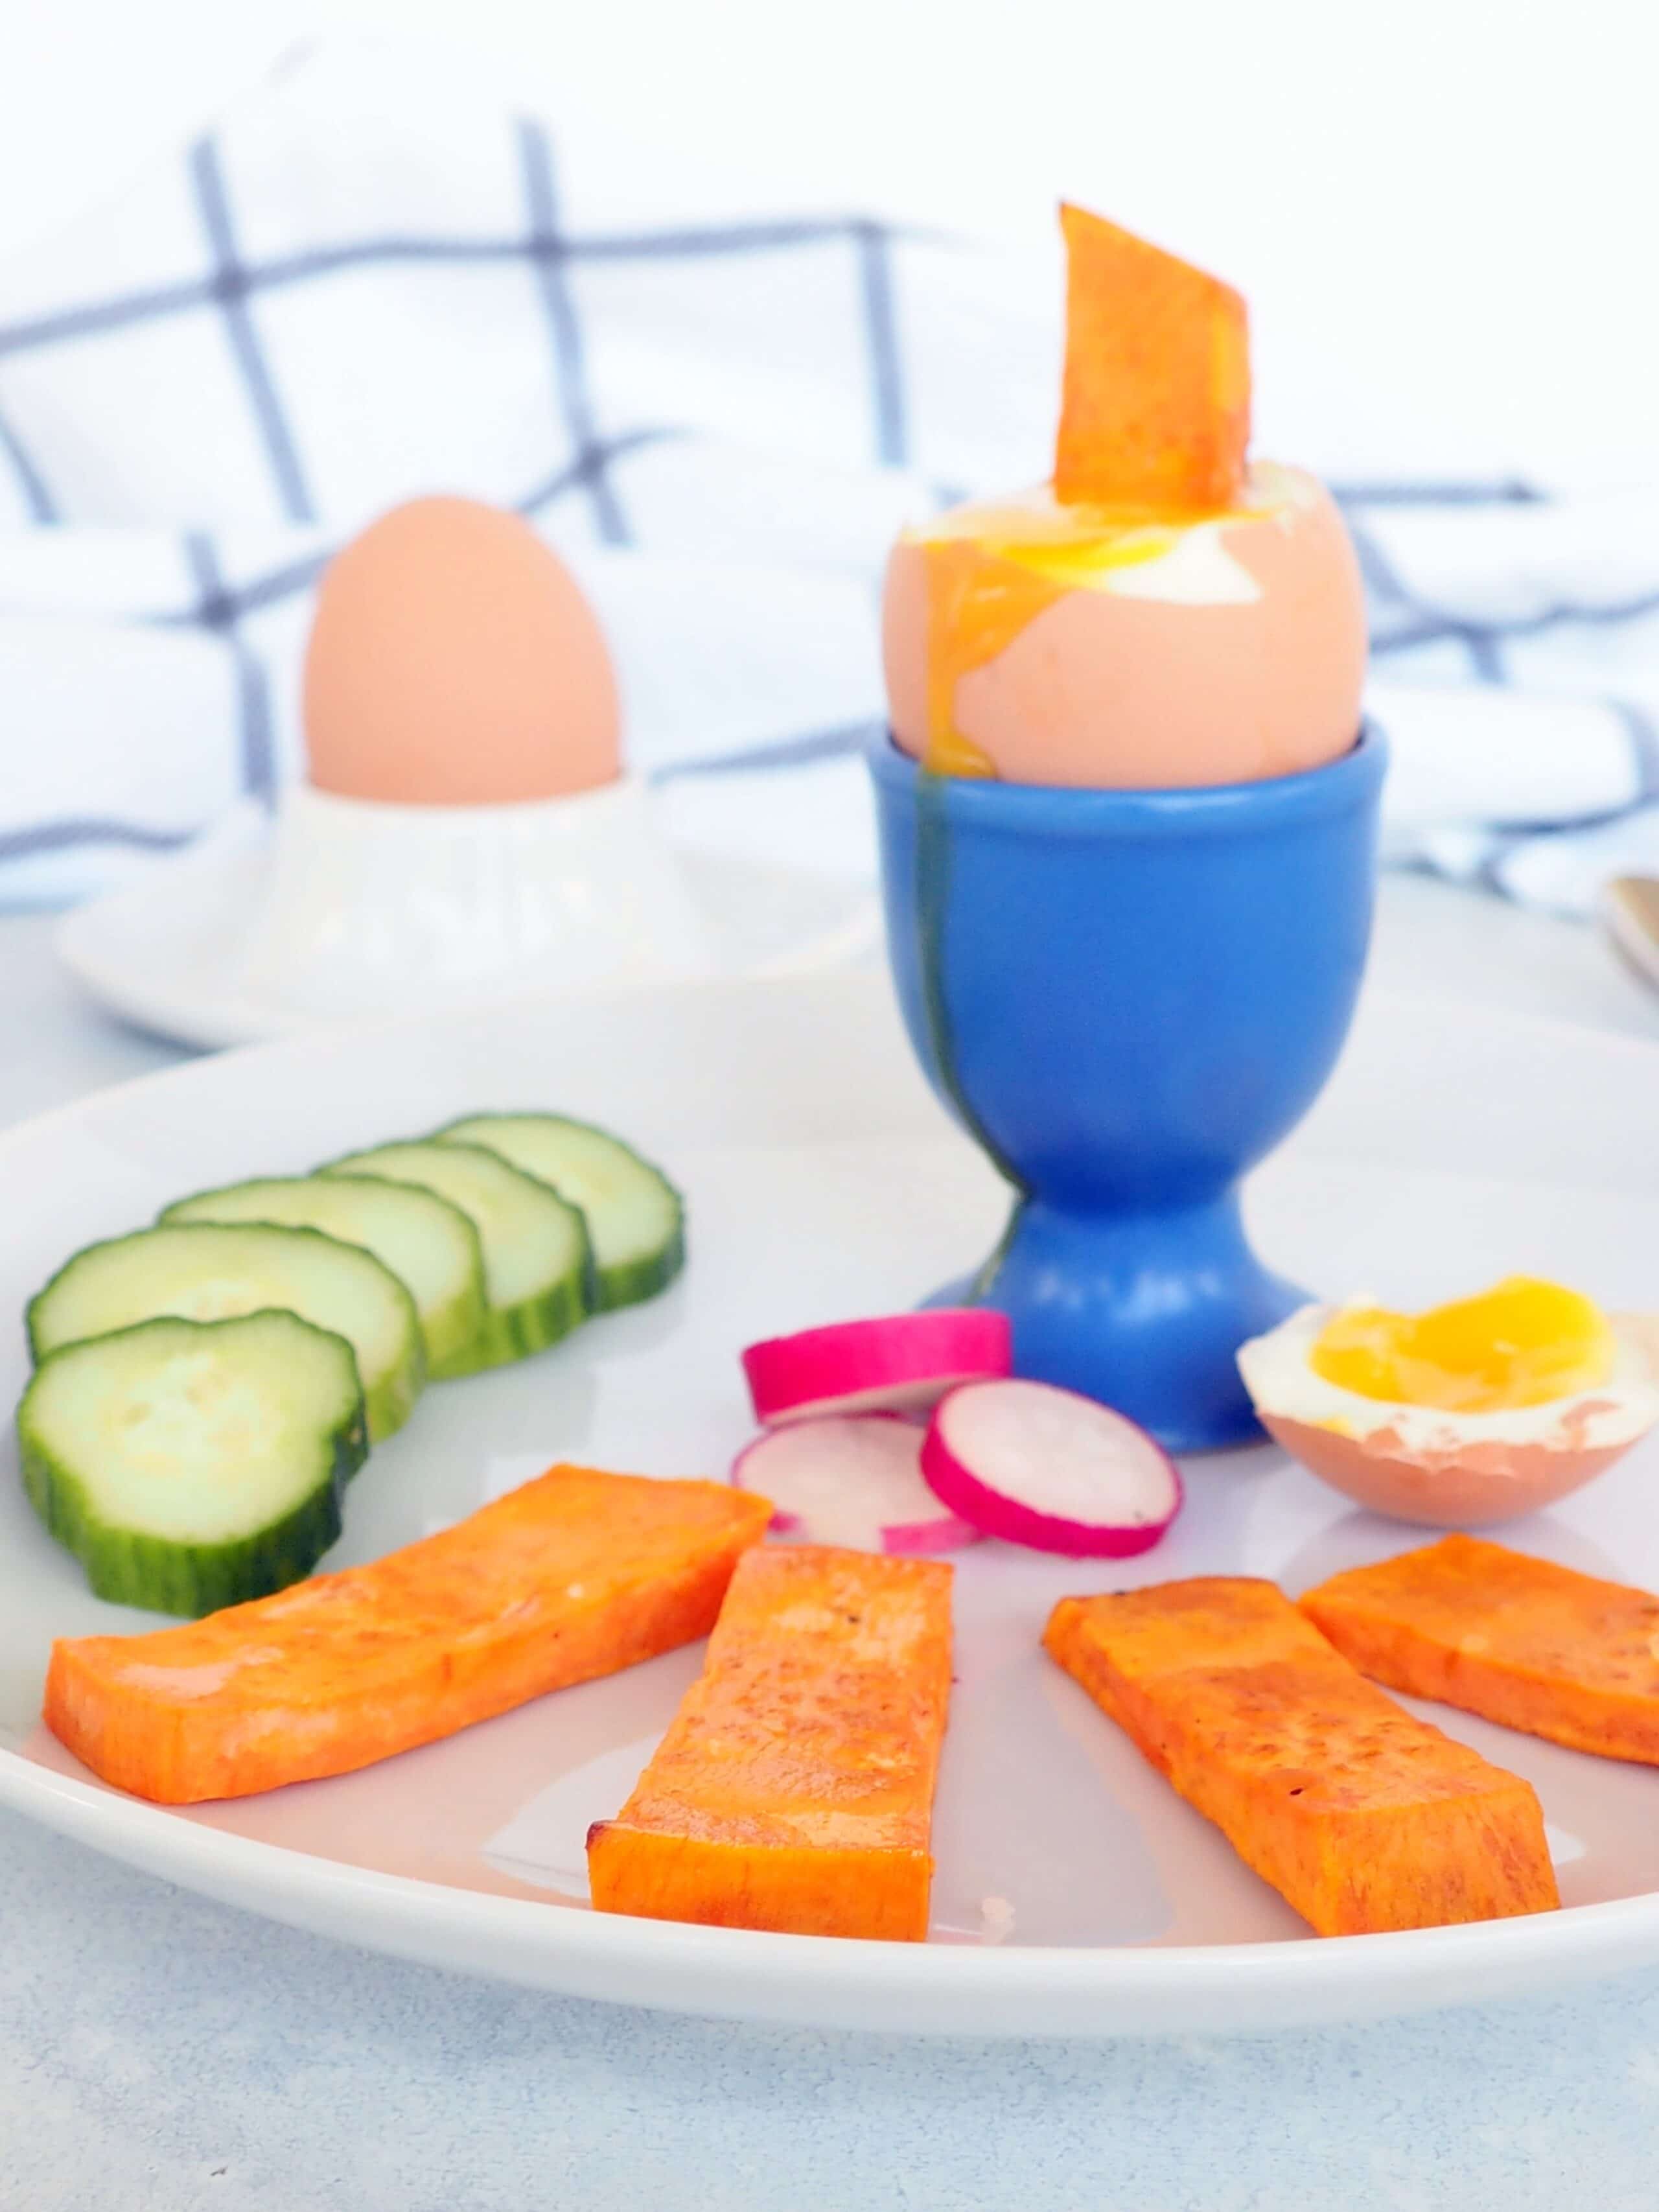 Old-school dippy eggs get a fresh update with addition of sweet potato soldiers and a side of veggies. This nutritious, colorful breakfast is perfect for fueling up before school or work. Fun. Simple. Protein-packed. Nutrient-rich. Gluten-free. Kid-approved. Mom-approved. From halsanutrition.com